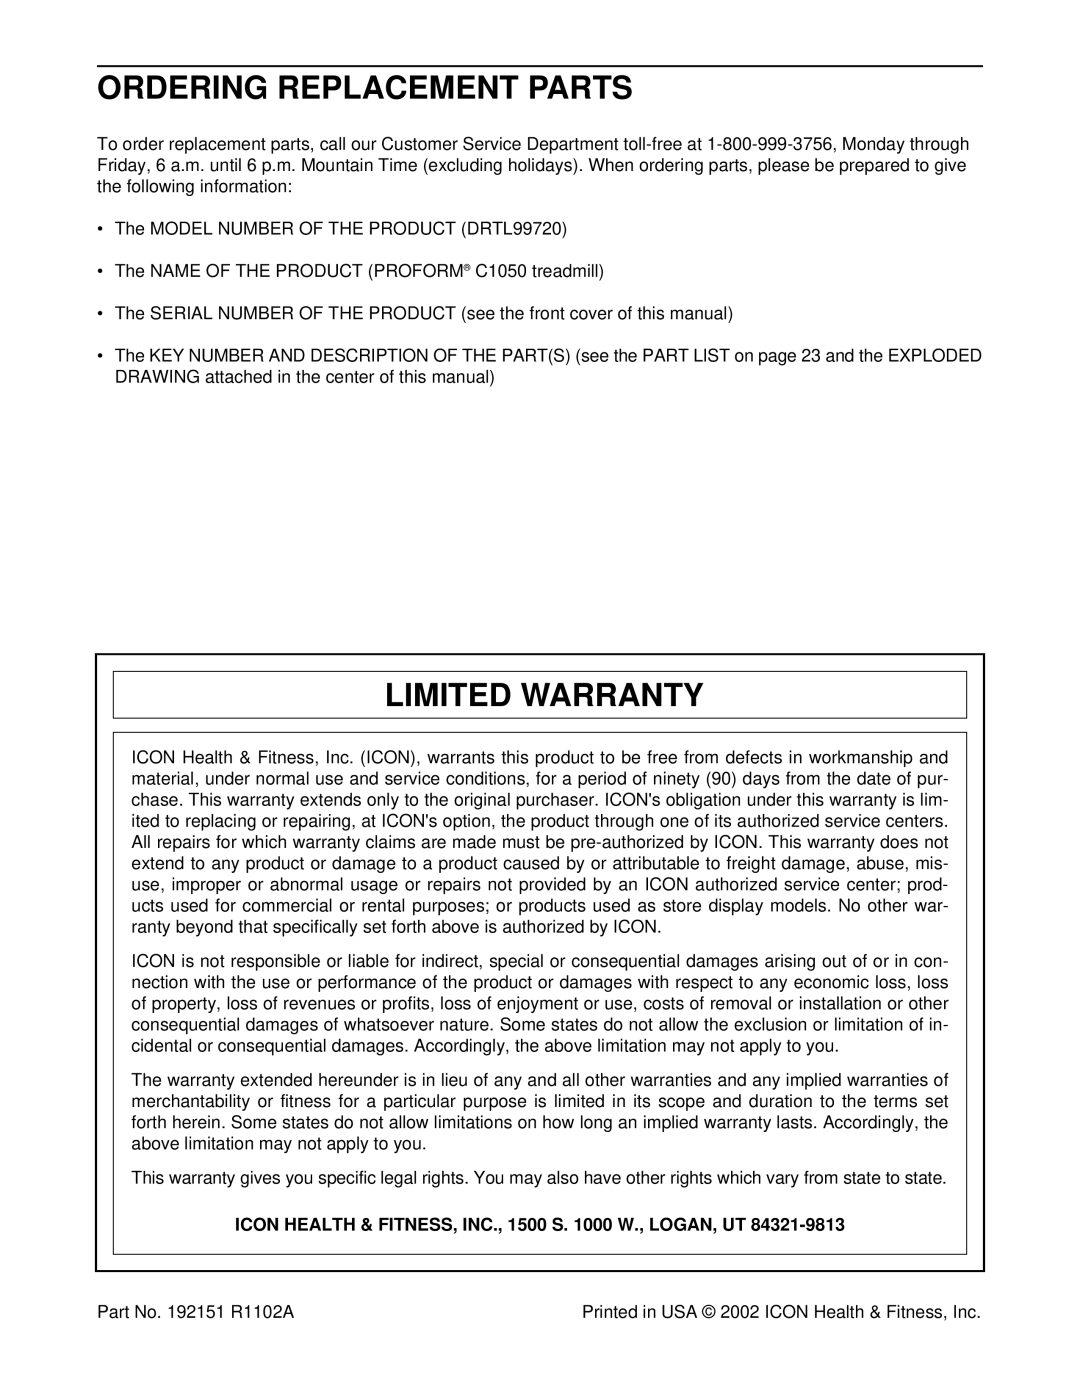 ProForm DRTL99720 Ordering Replacement Parts, Limited Warranty, ICON HEALTH & FITNESS, INC., 1500 S. 1000 W., LOGAN, UT 